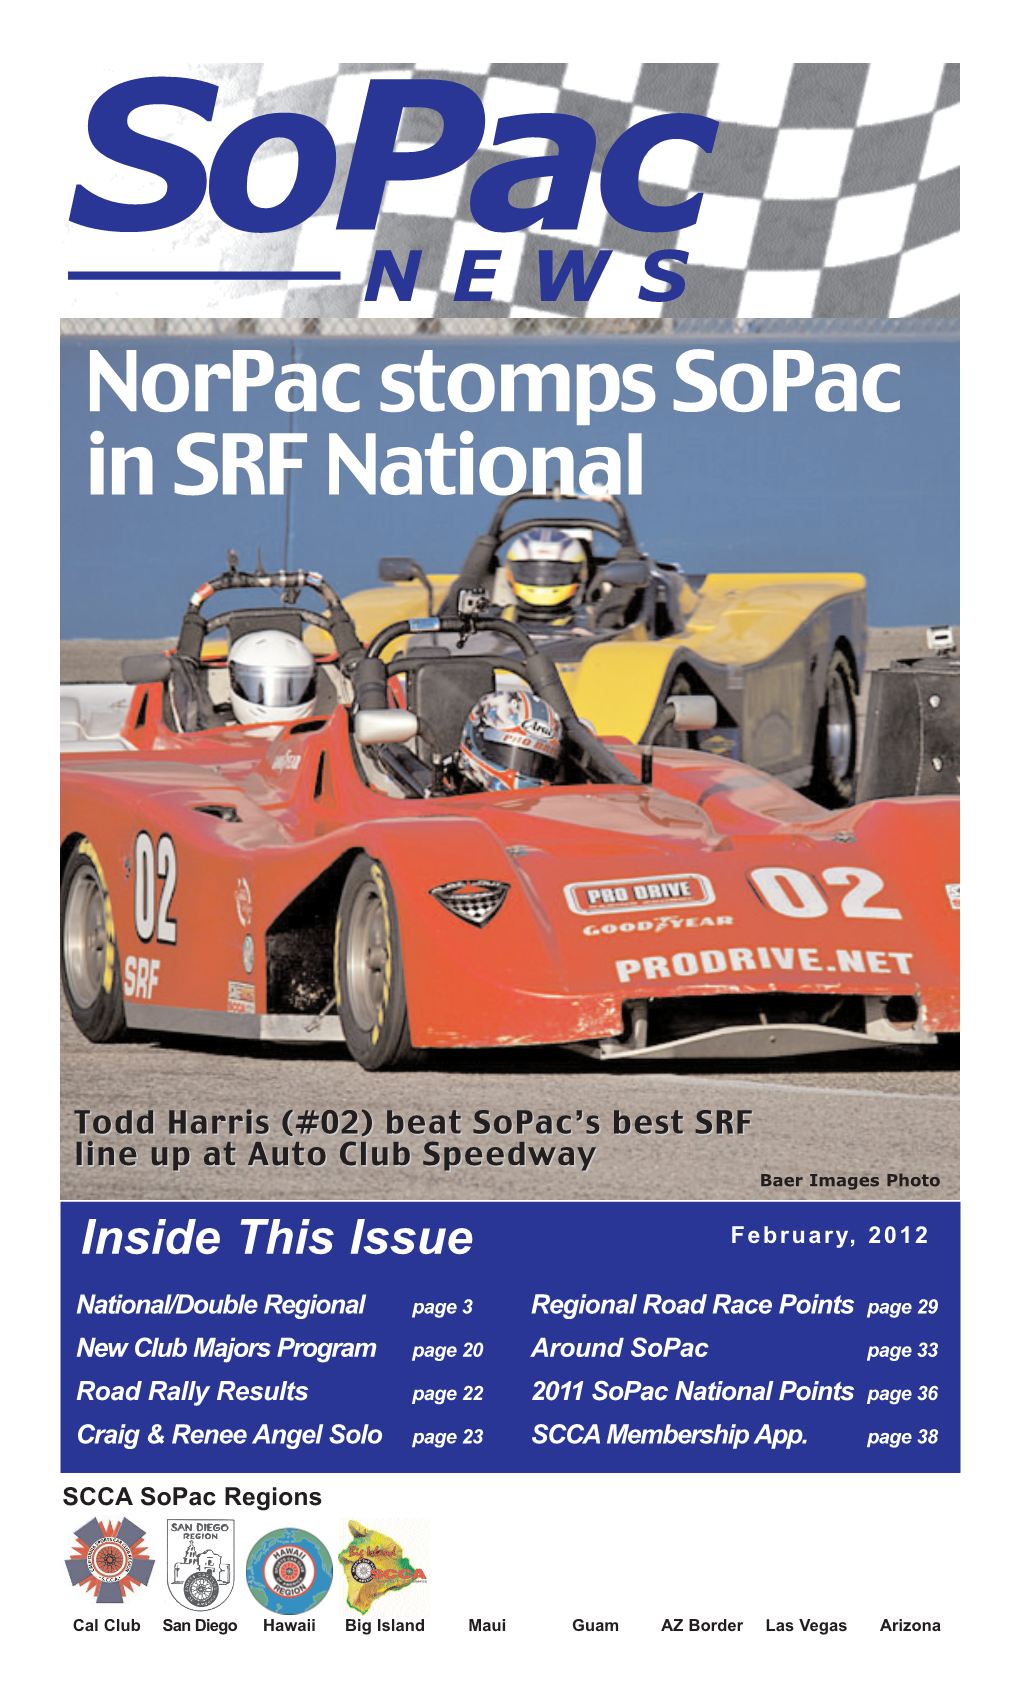 Norpac Stomps Sopac in SRF National